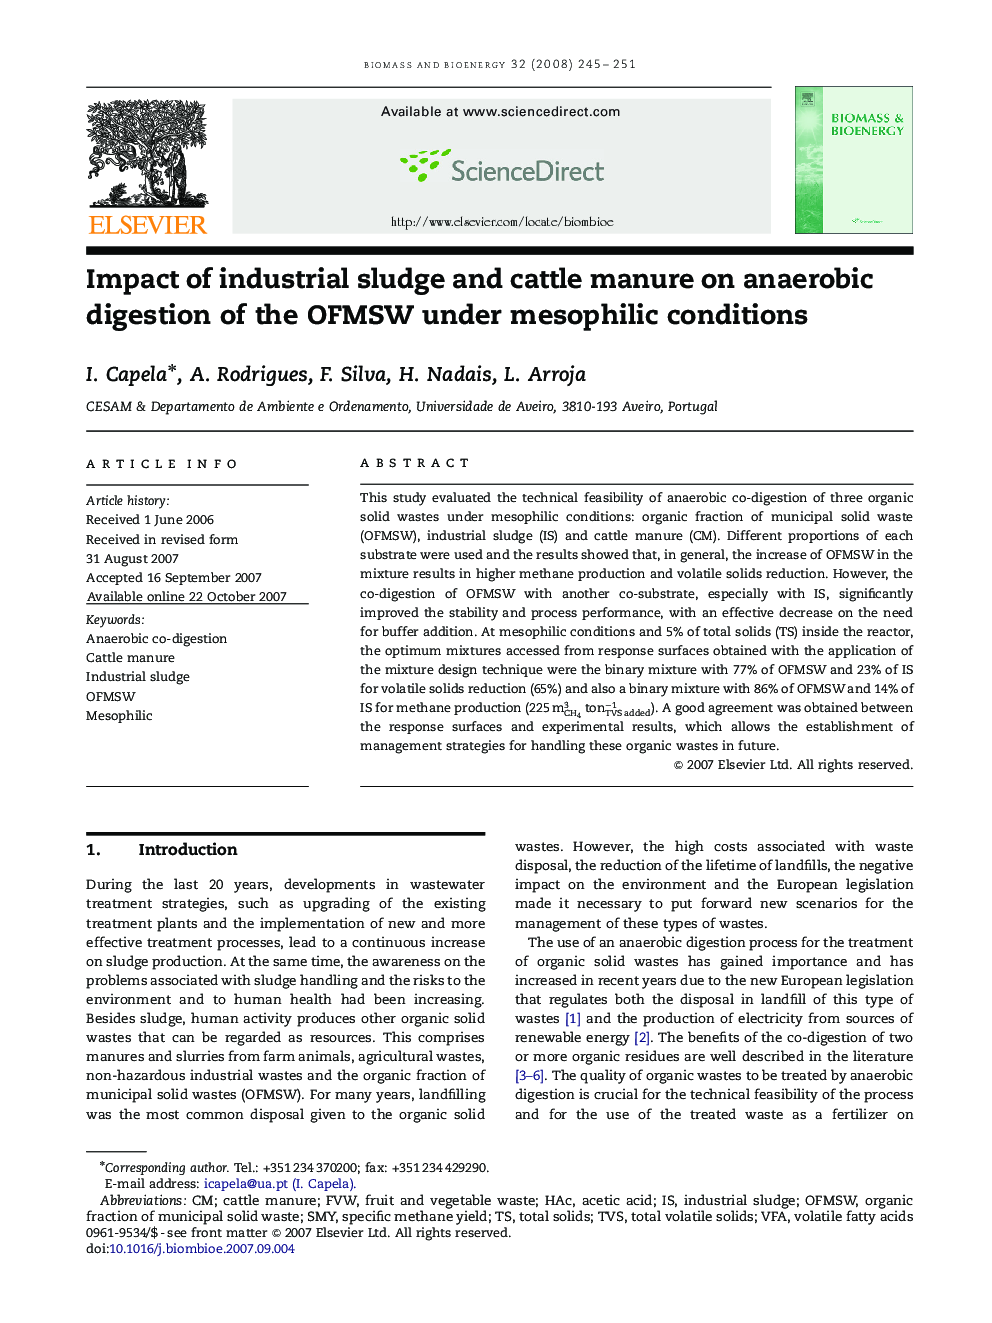 Impact of industrial sludge and cattle manure on anaerobic digestion of the OFMSW under mesophilic conditions